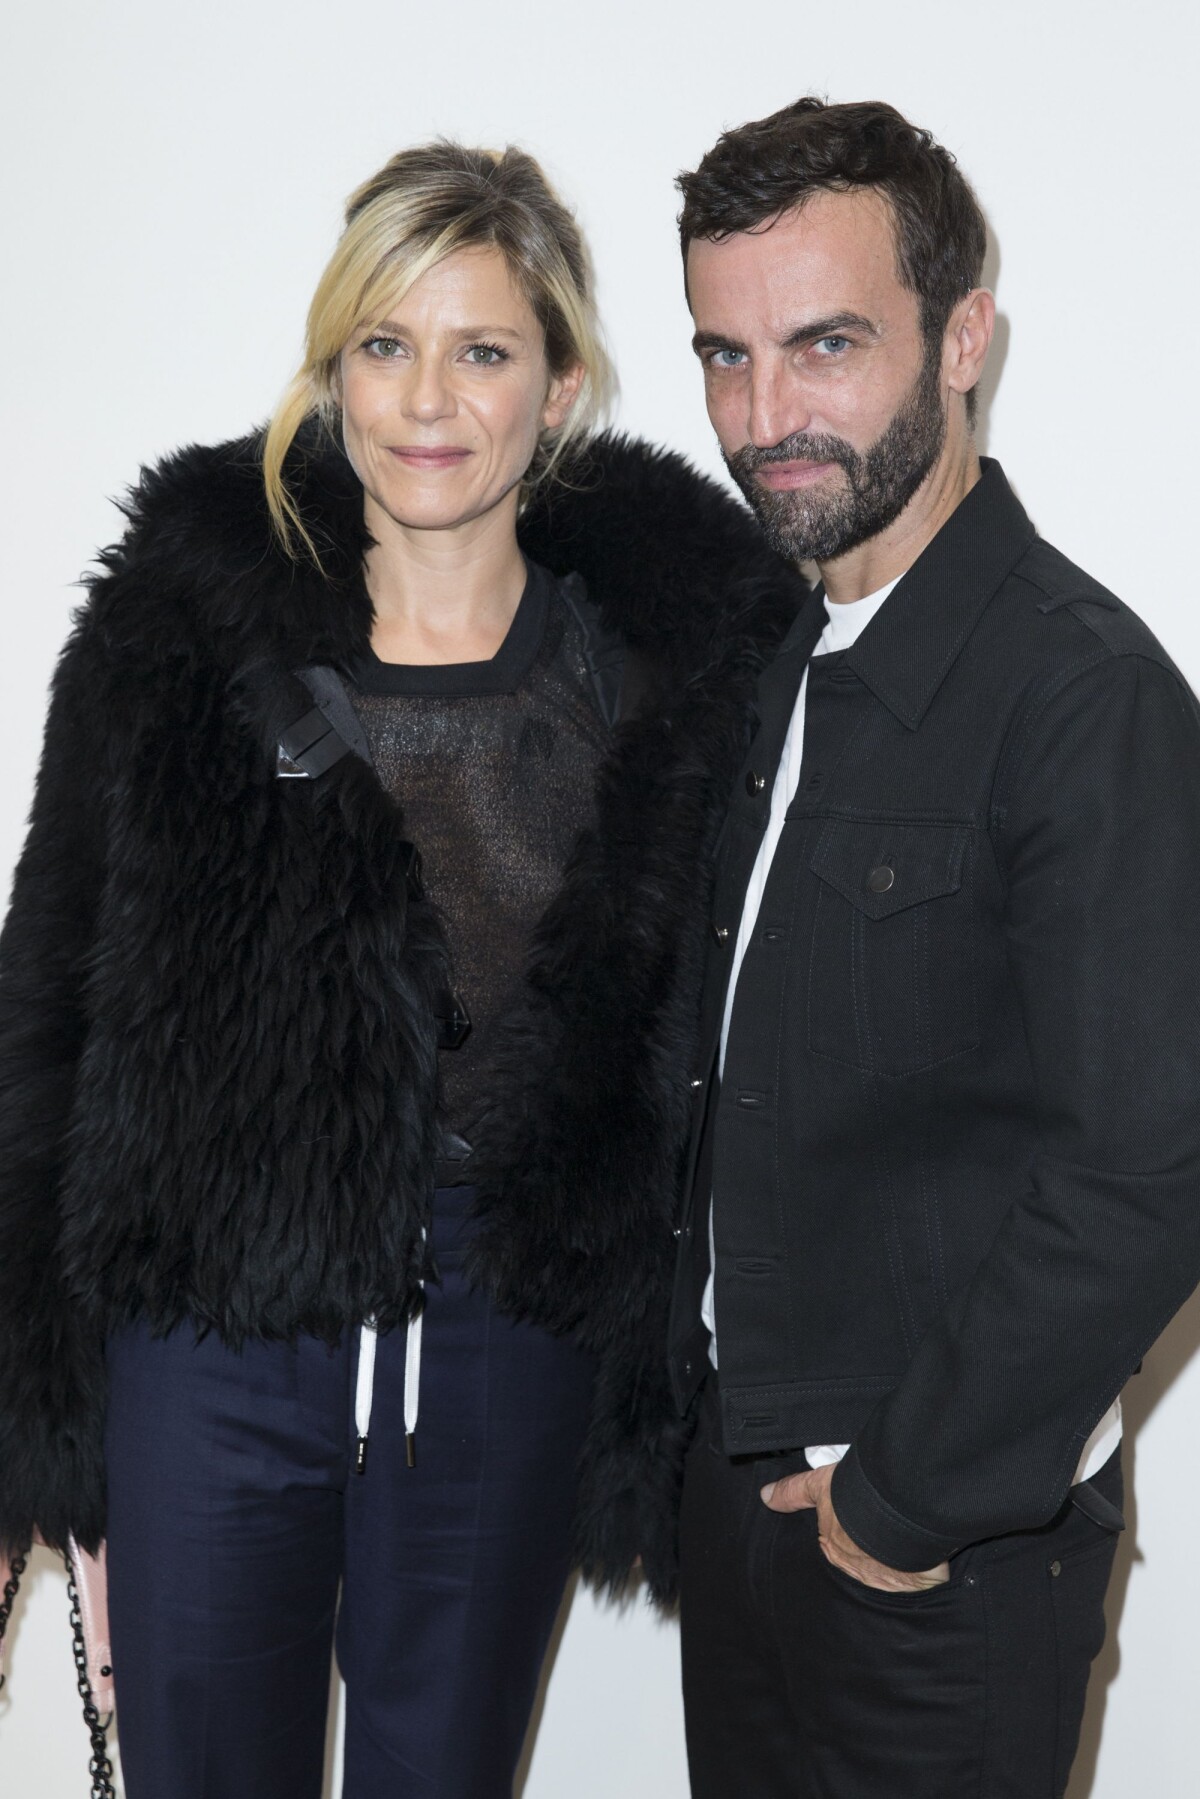 Marina Fois poses with Nicolas Ghesquiere after the Louis Vuitton